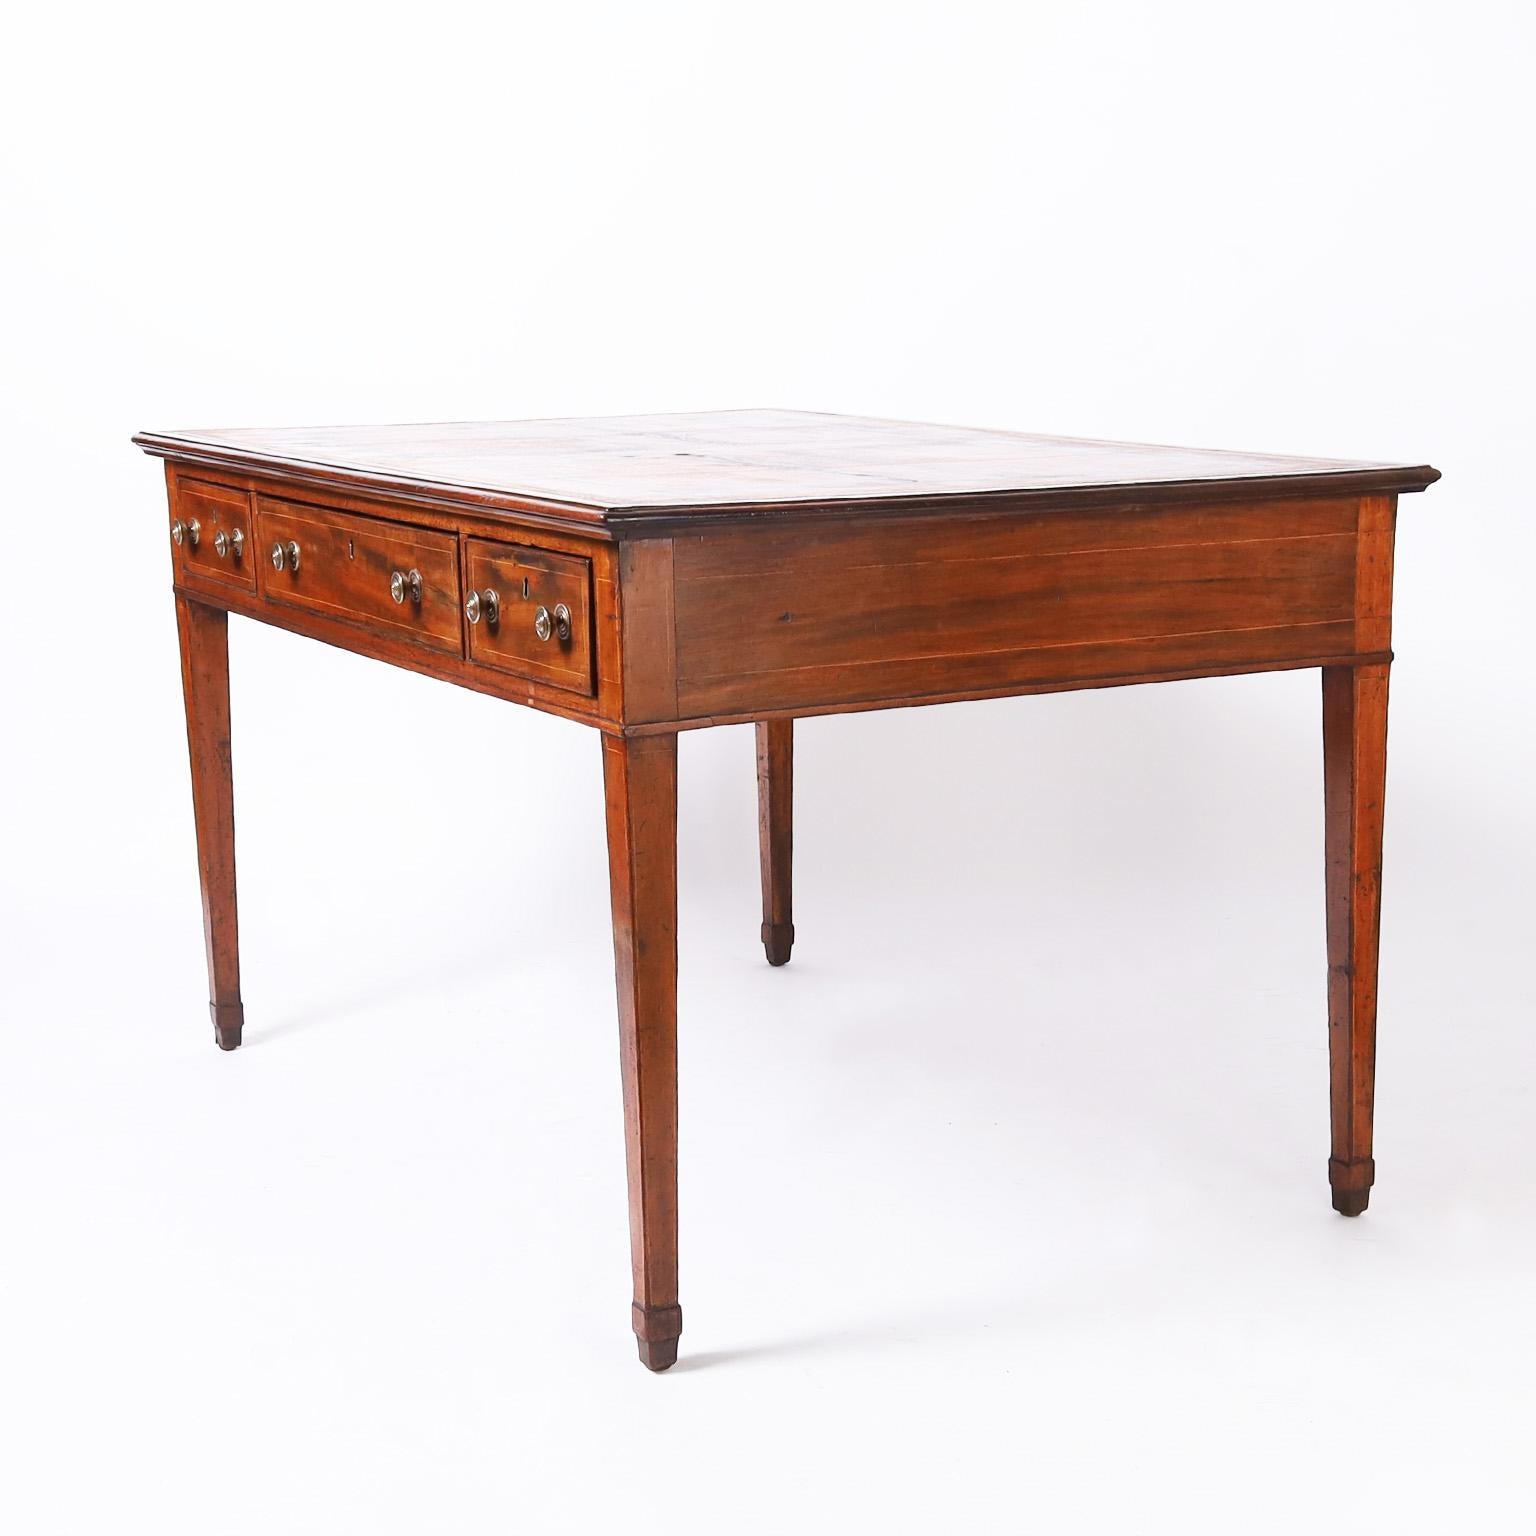 English Antique Hepplewhite Leather Top Partners Desk For Sale